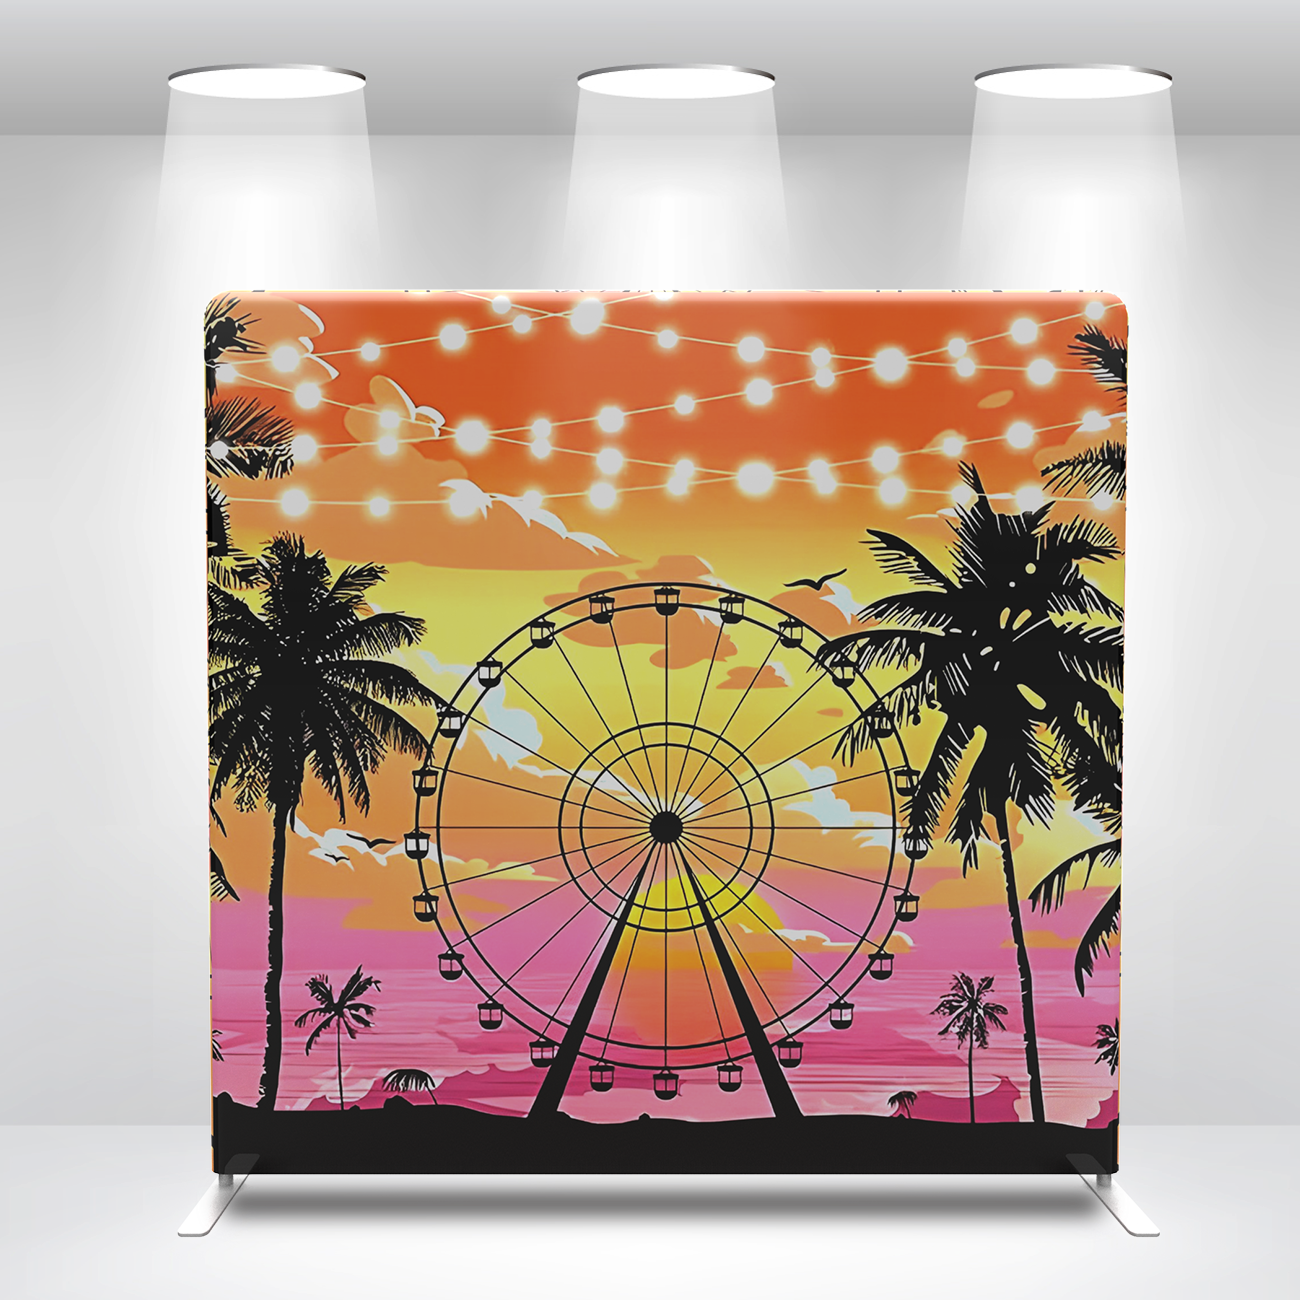 Sunset Seaside Ferris Wheel Pillow Case Photo Booth Straight Backdrop Wall Cover With Stand For Birthday Party Photography Photo Shoot Studio Prop